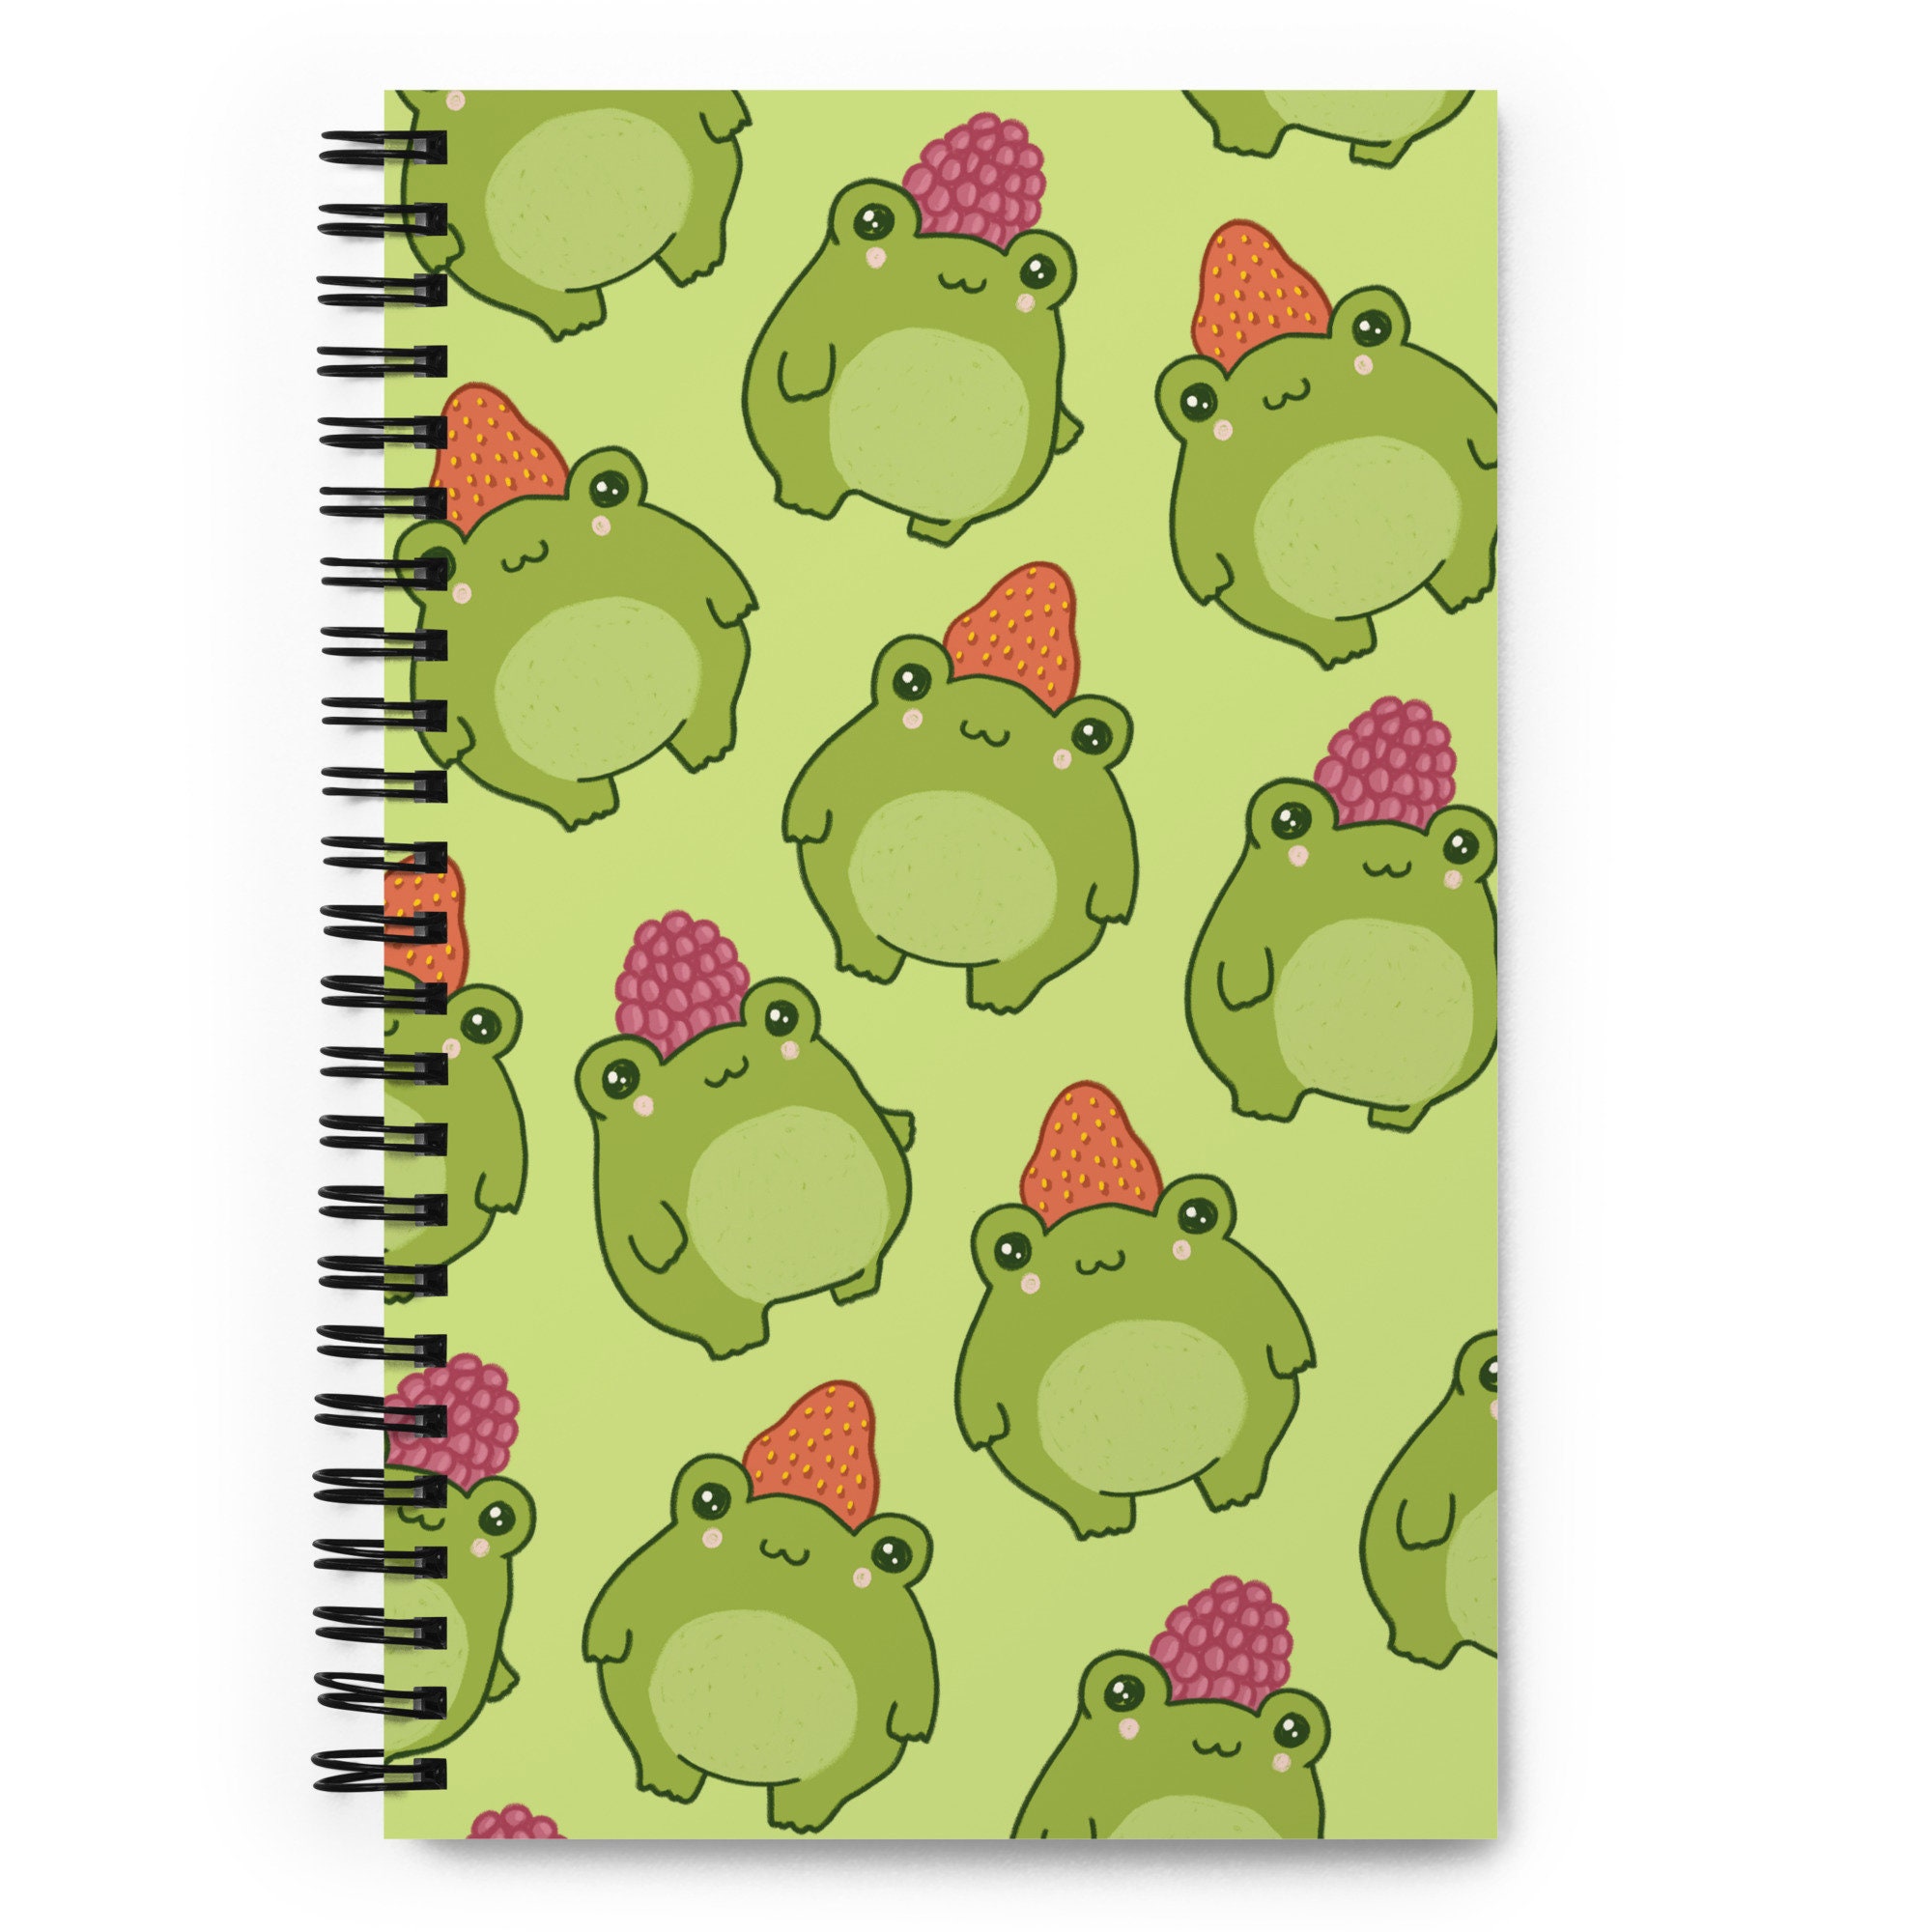 Cute Notebook for School Etsy